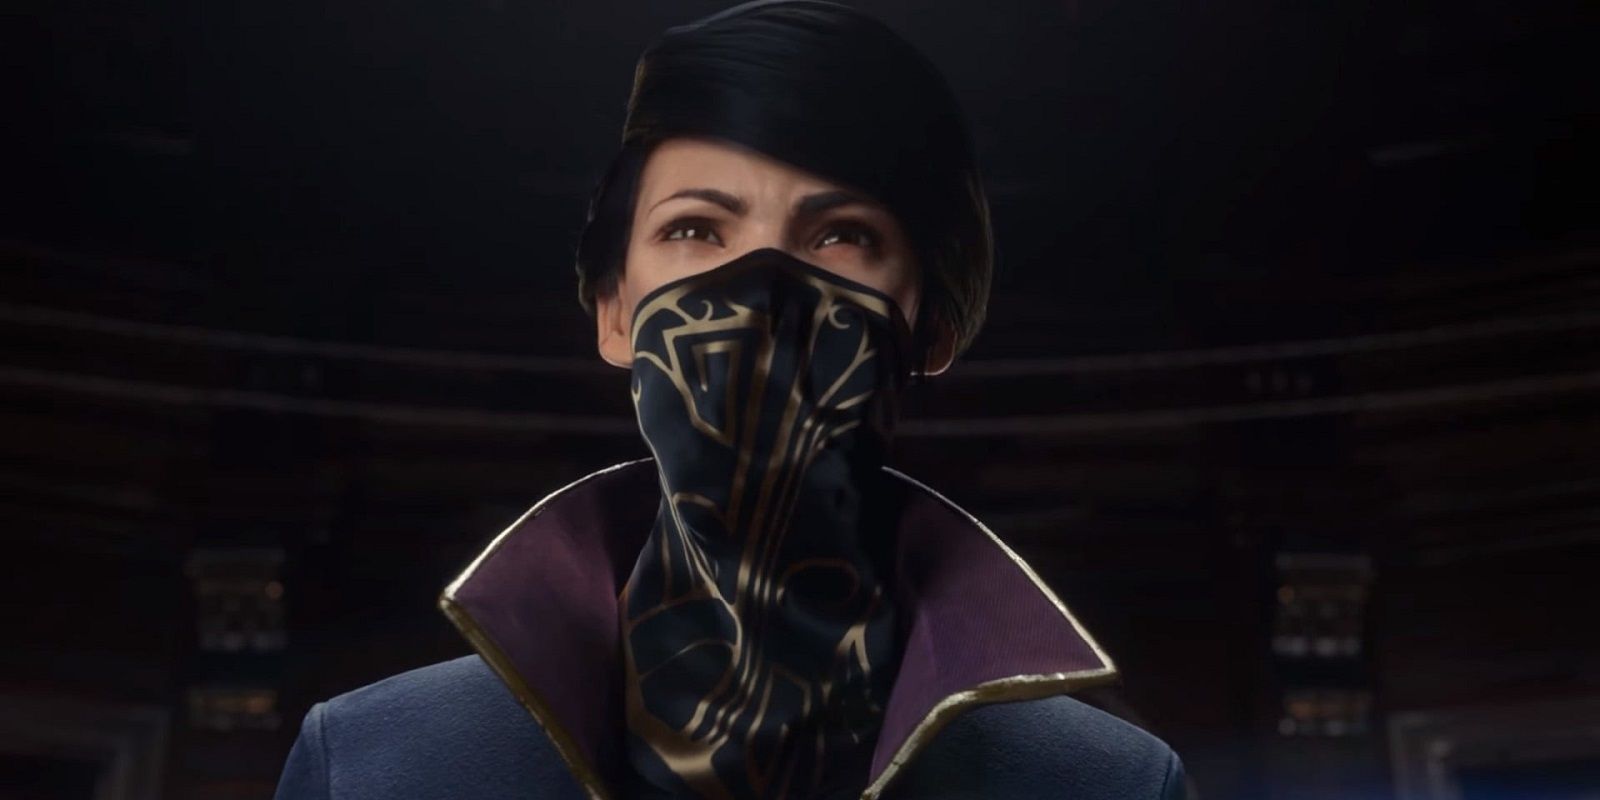 Empress Emily Kaldwin in the Dishonored 2 trailer